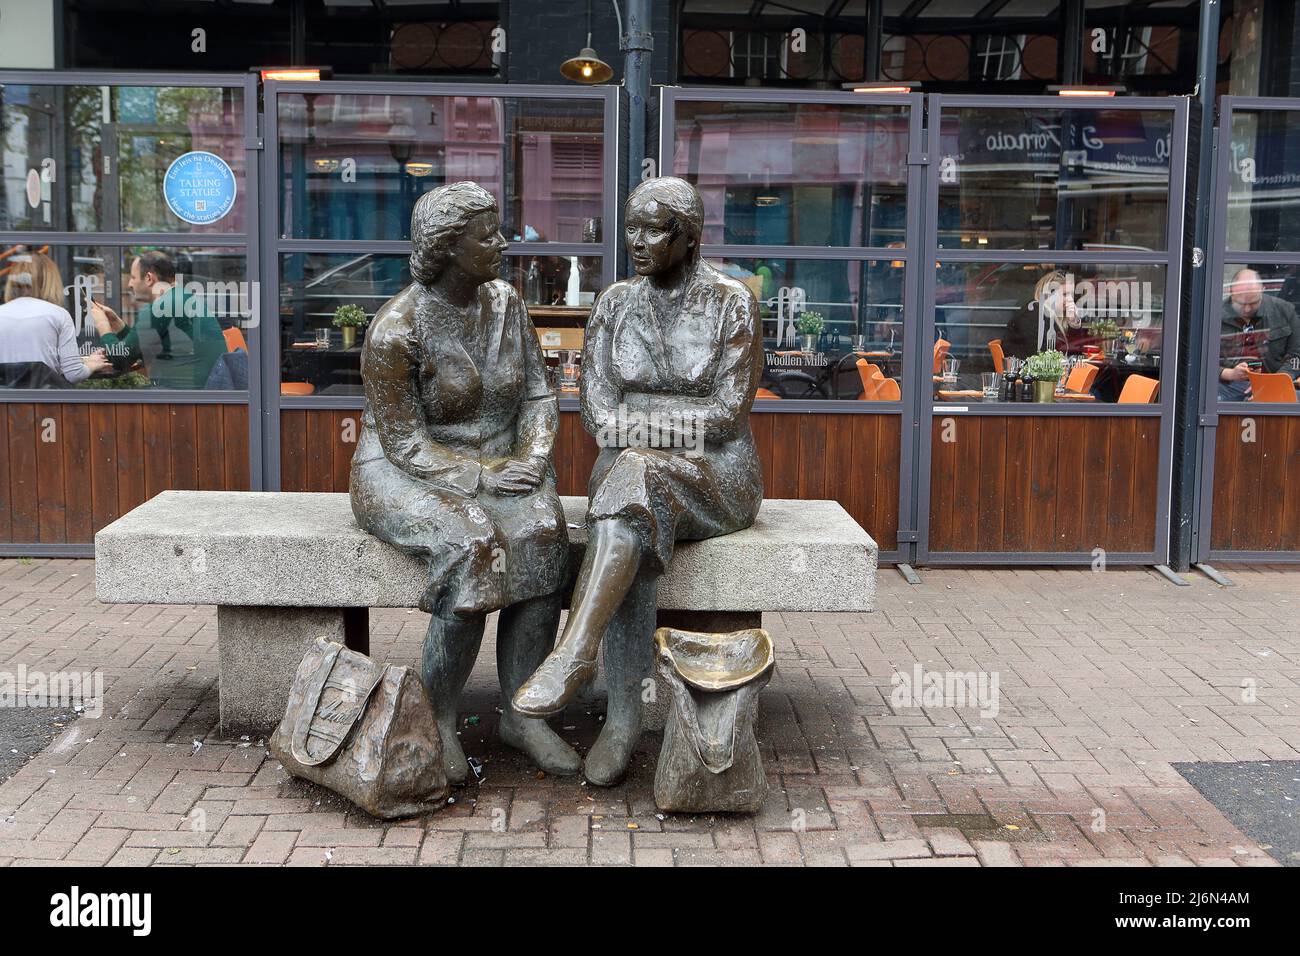 The 'Meeting Place' statue by artist Jackie McKenna, aka 'The Hags with the Bags' situated on lower Liffey street in Dublin by the Ha'penny bridge. Stock Photo